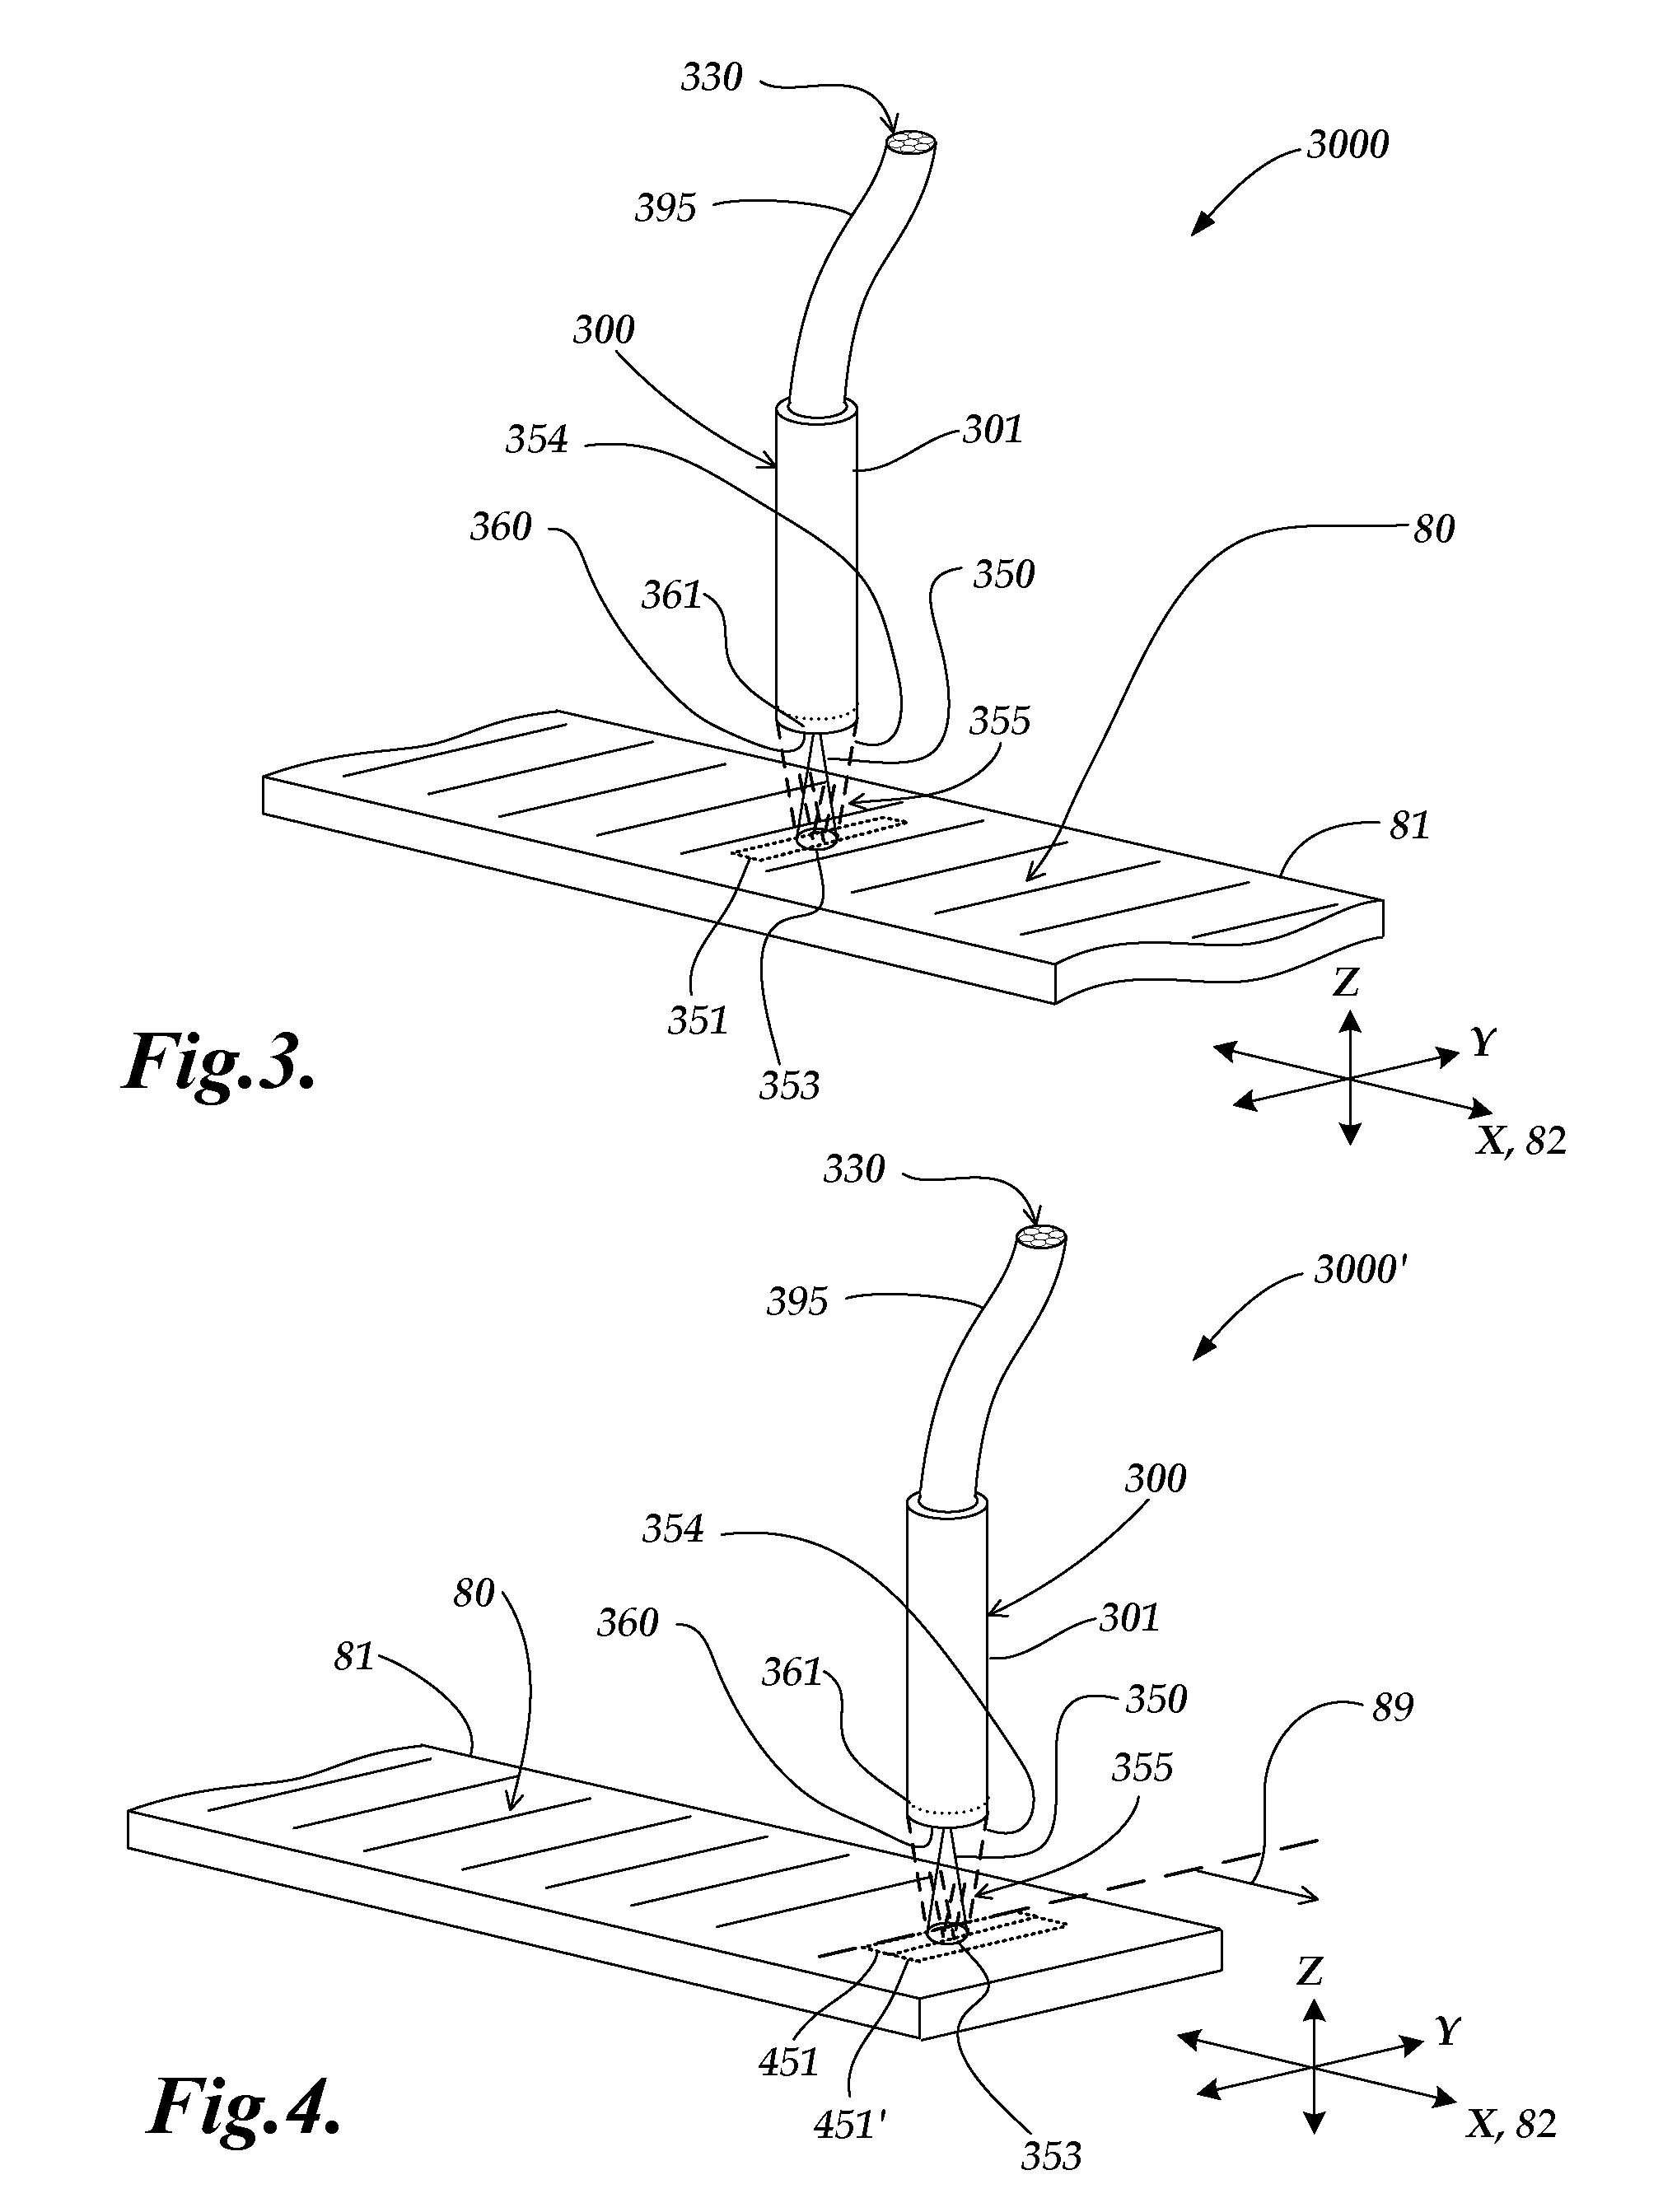 Reference signal generating configuration for an interferometric miniature grating encoder readhead using fiber optic receiver channels